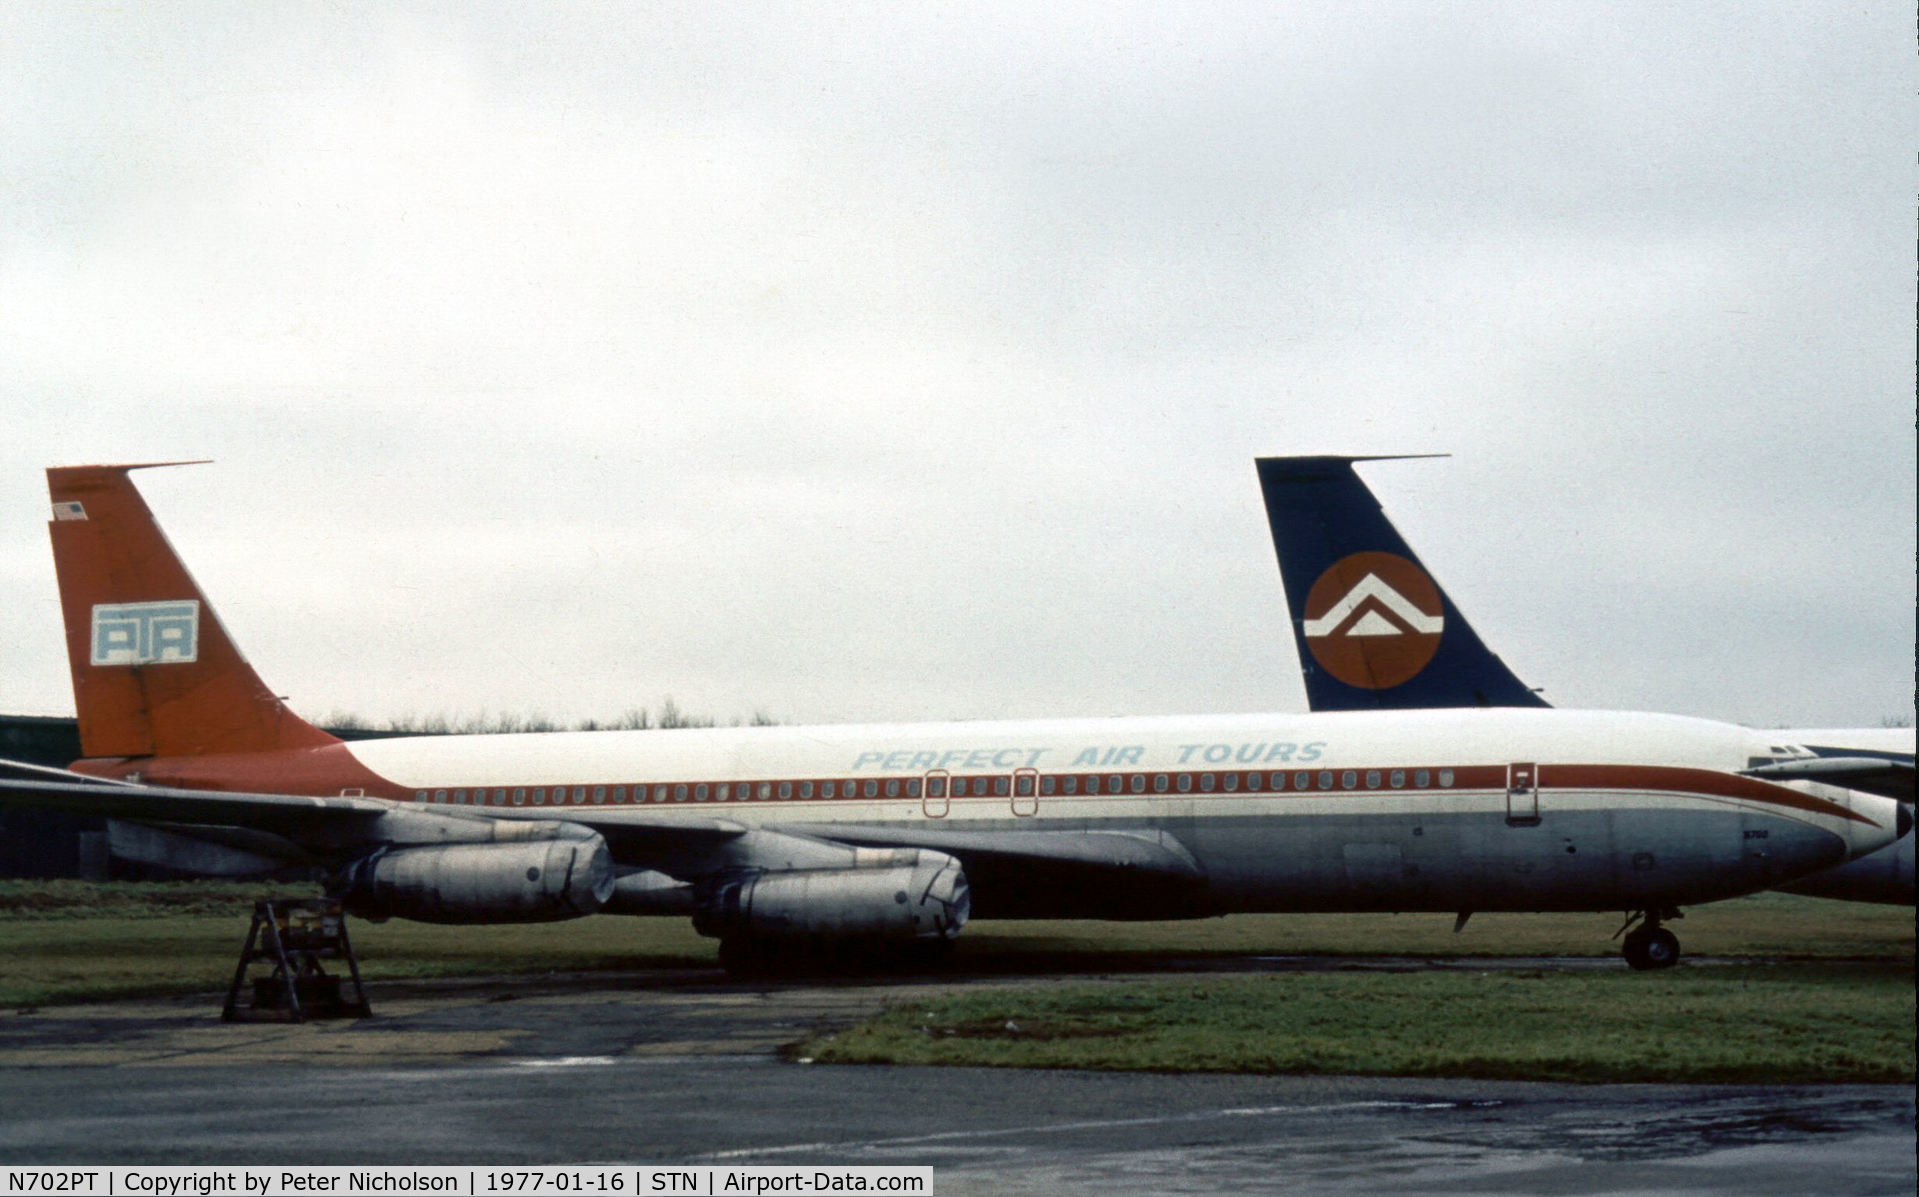 N702PT, 1959 Boeing 707-331C C/N 17677, Boeing 707-331C of Perfect Air Tours as seen at Stansted in January 1977.